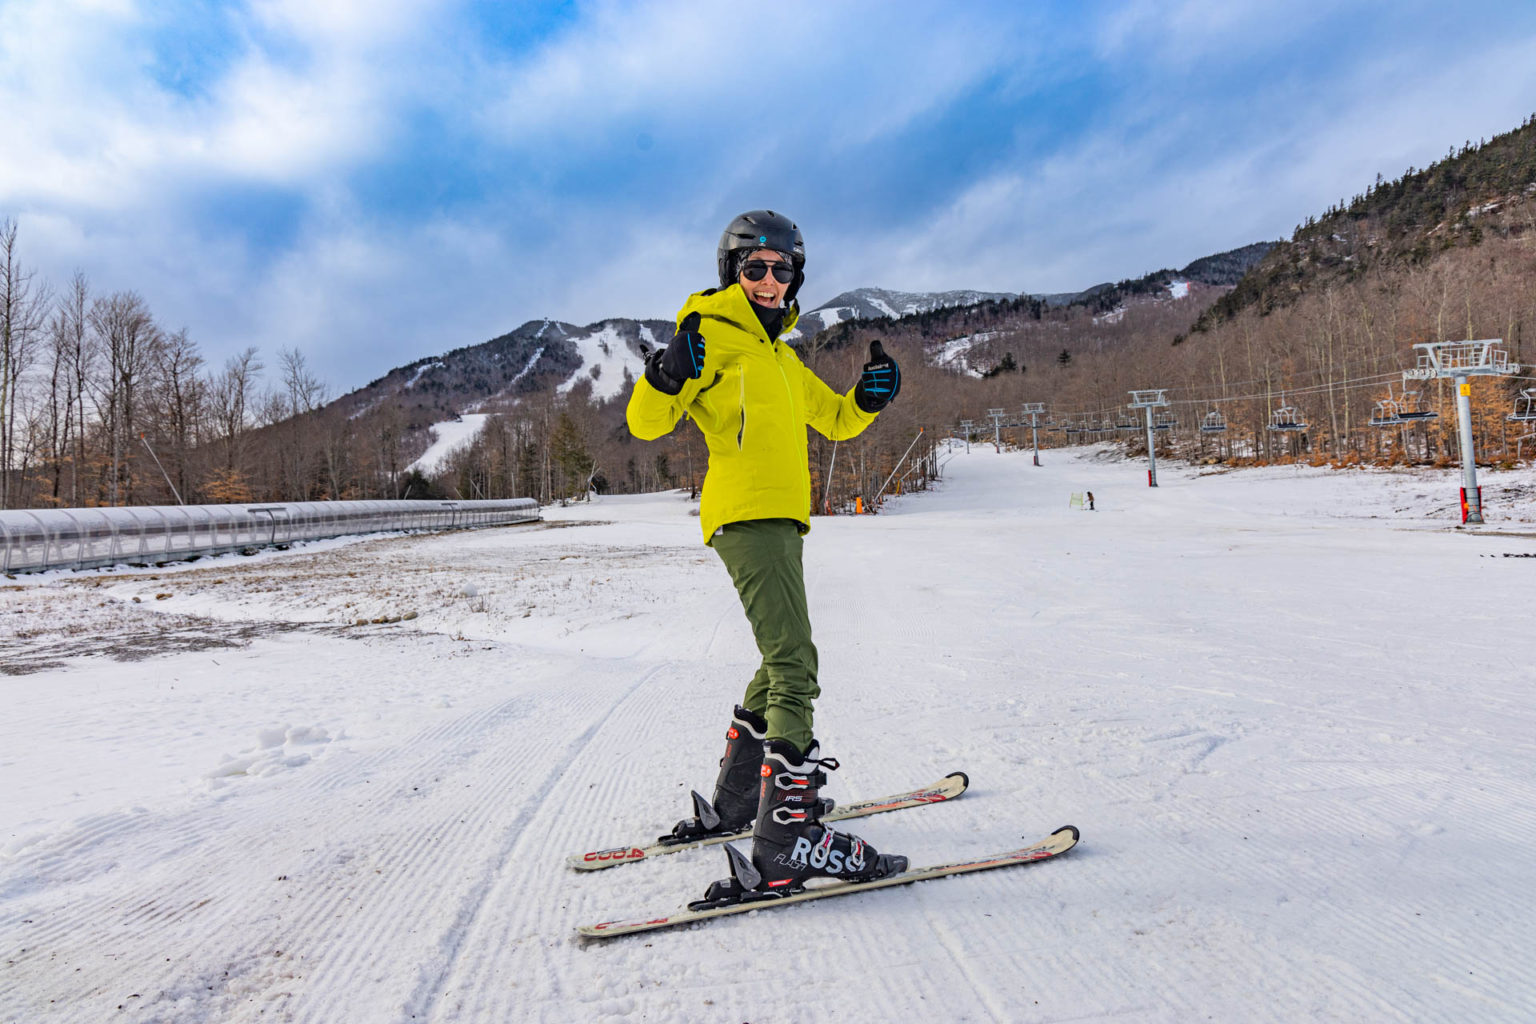 Lake Placid Winter Activities Outdoorsy Things to do in Lake Placid